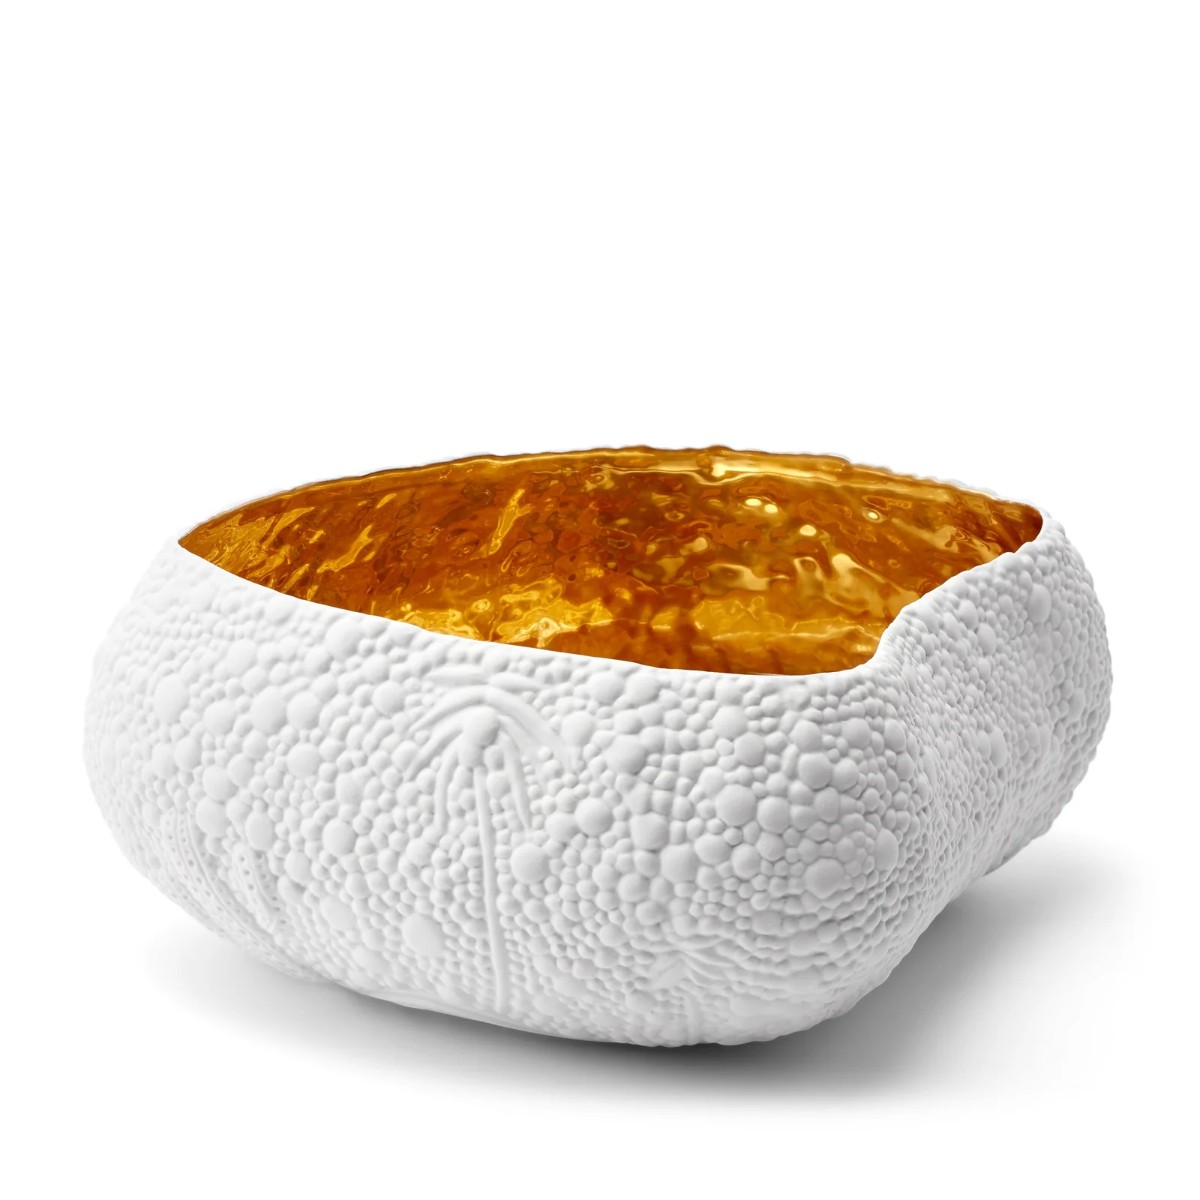 L’Objet | Haas Mojave Desert Bowl - Large | White and Gold